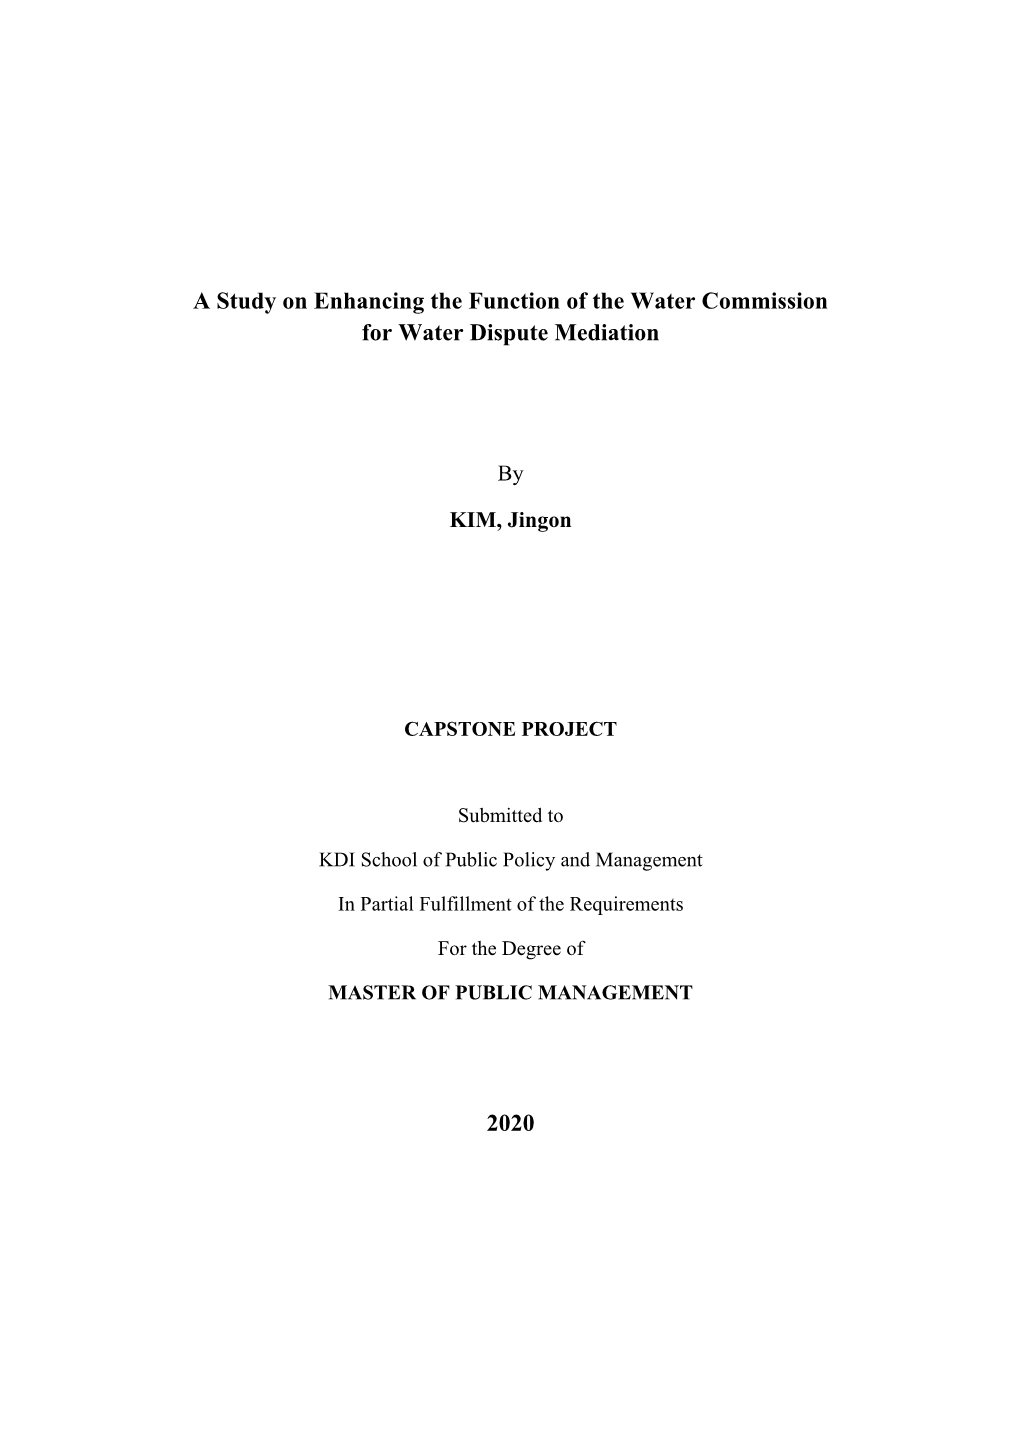 A Study on Enhancing the Function of the Water Commission for Water Dispute Mediation